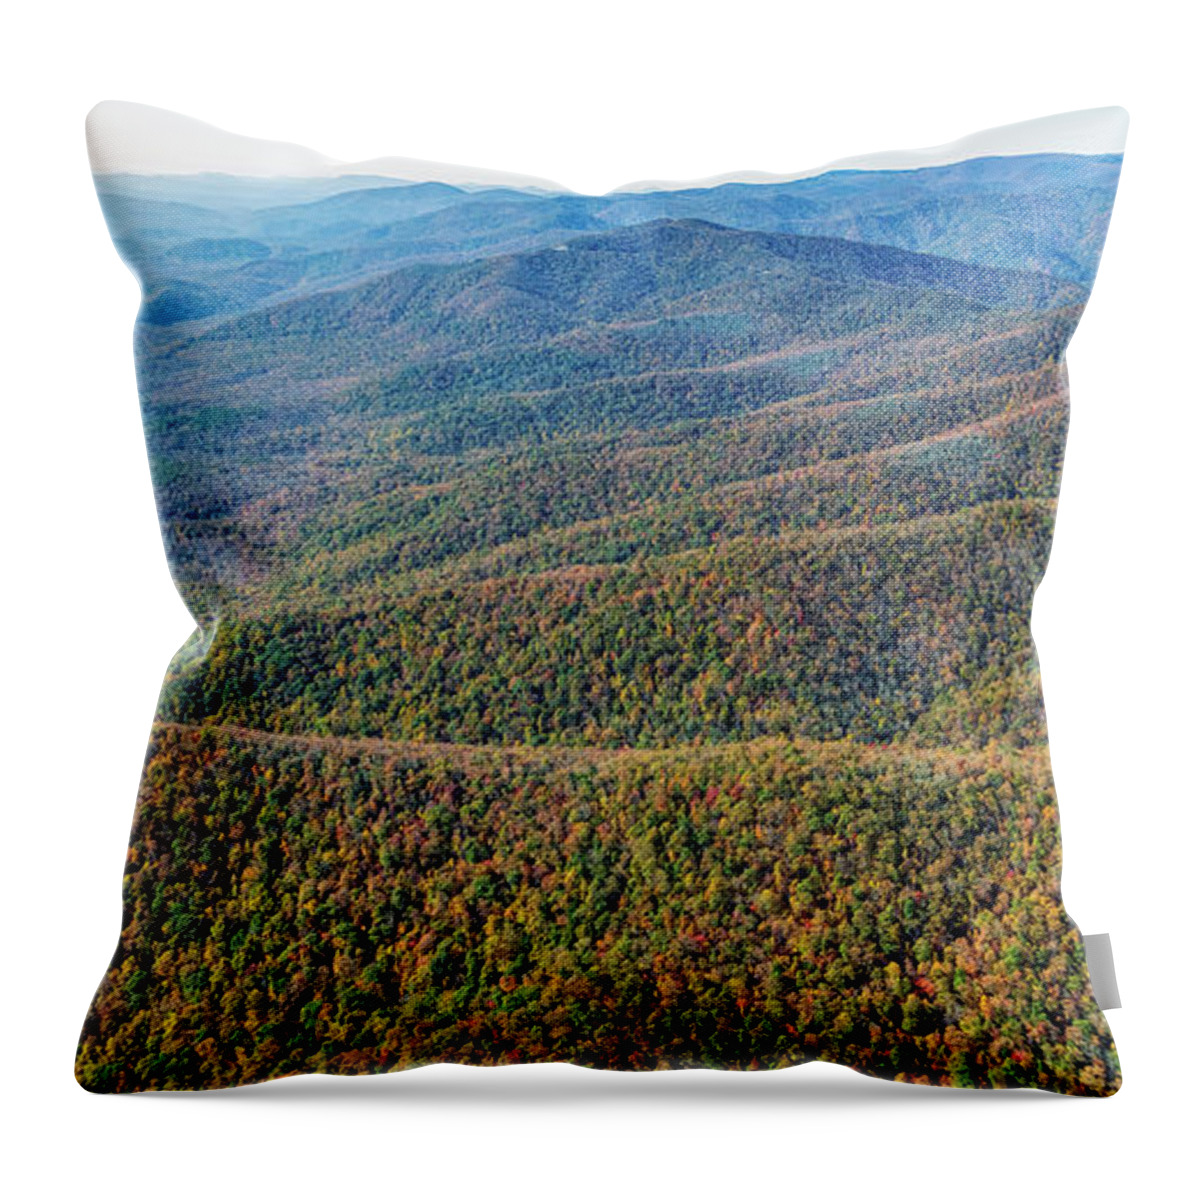 Pisgah National Forest Throw Pillow featuring the photograph Ridgelines Along the Blue Ridge Parkway in Pisgah National Forest by David Oppenheimer